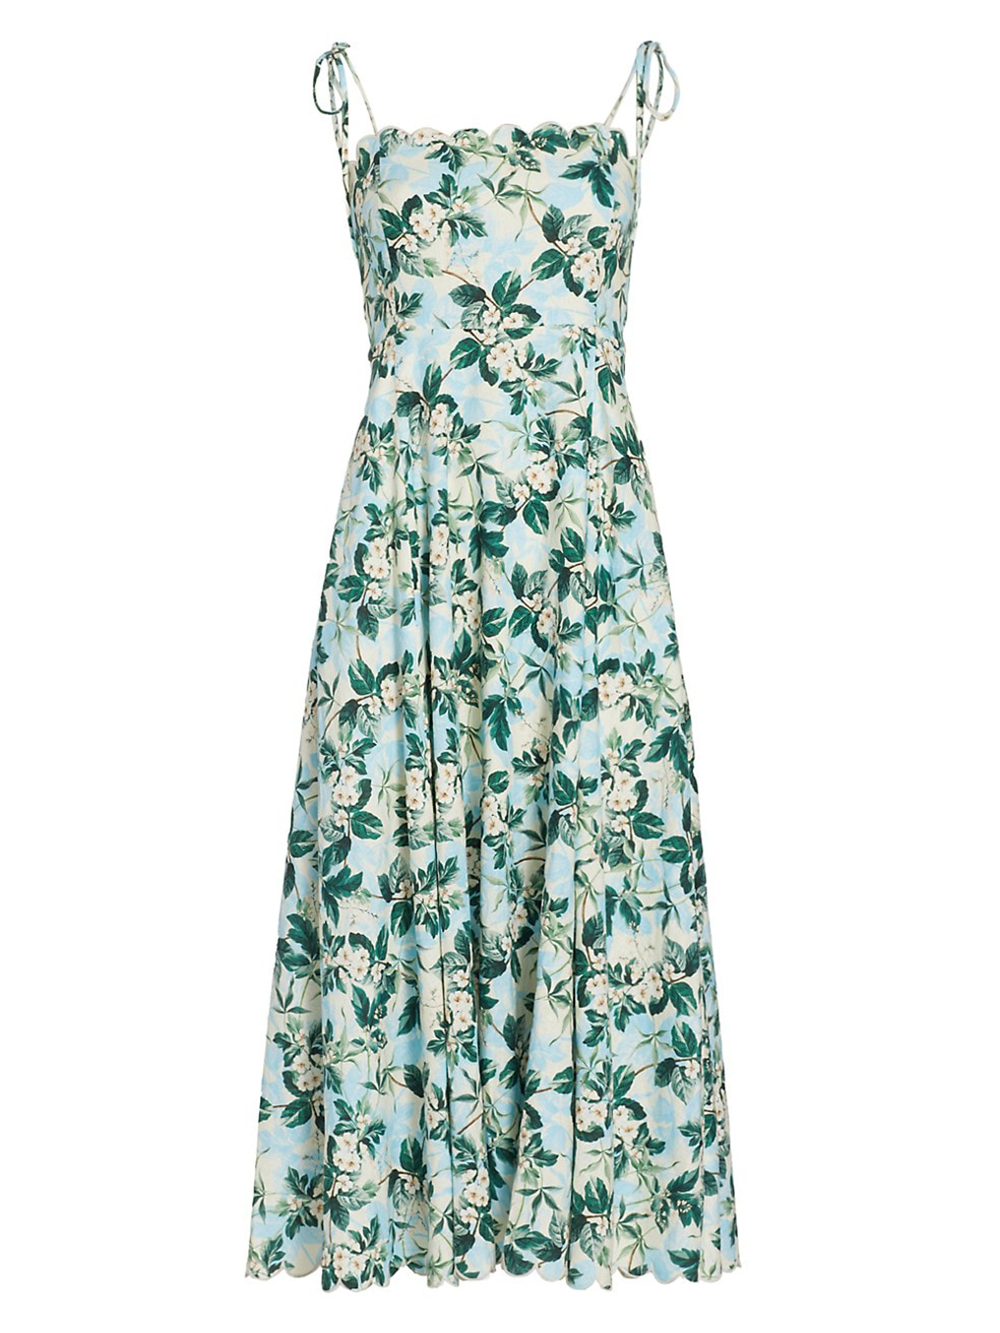 Must have floral summer dresses chosen by Marla Meridith